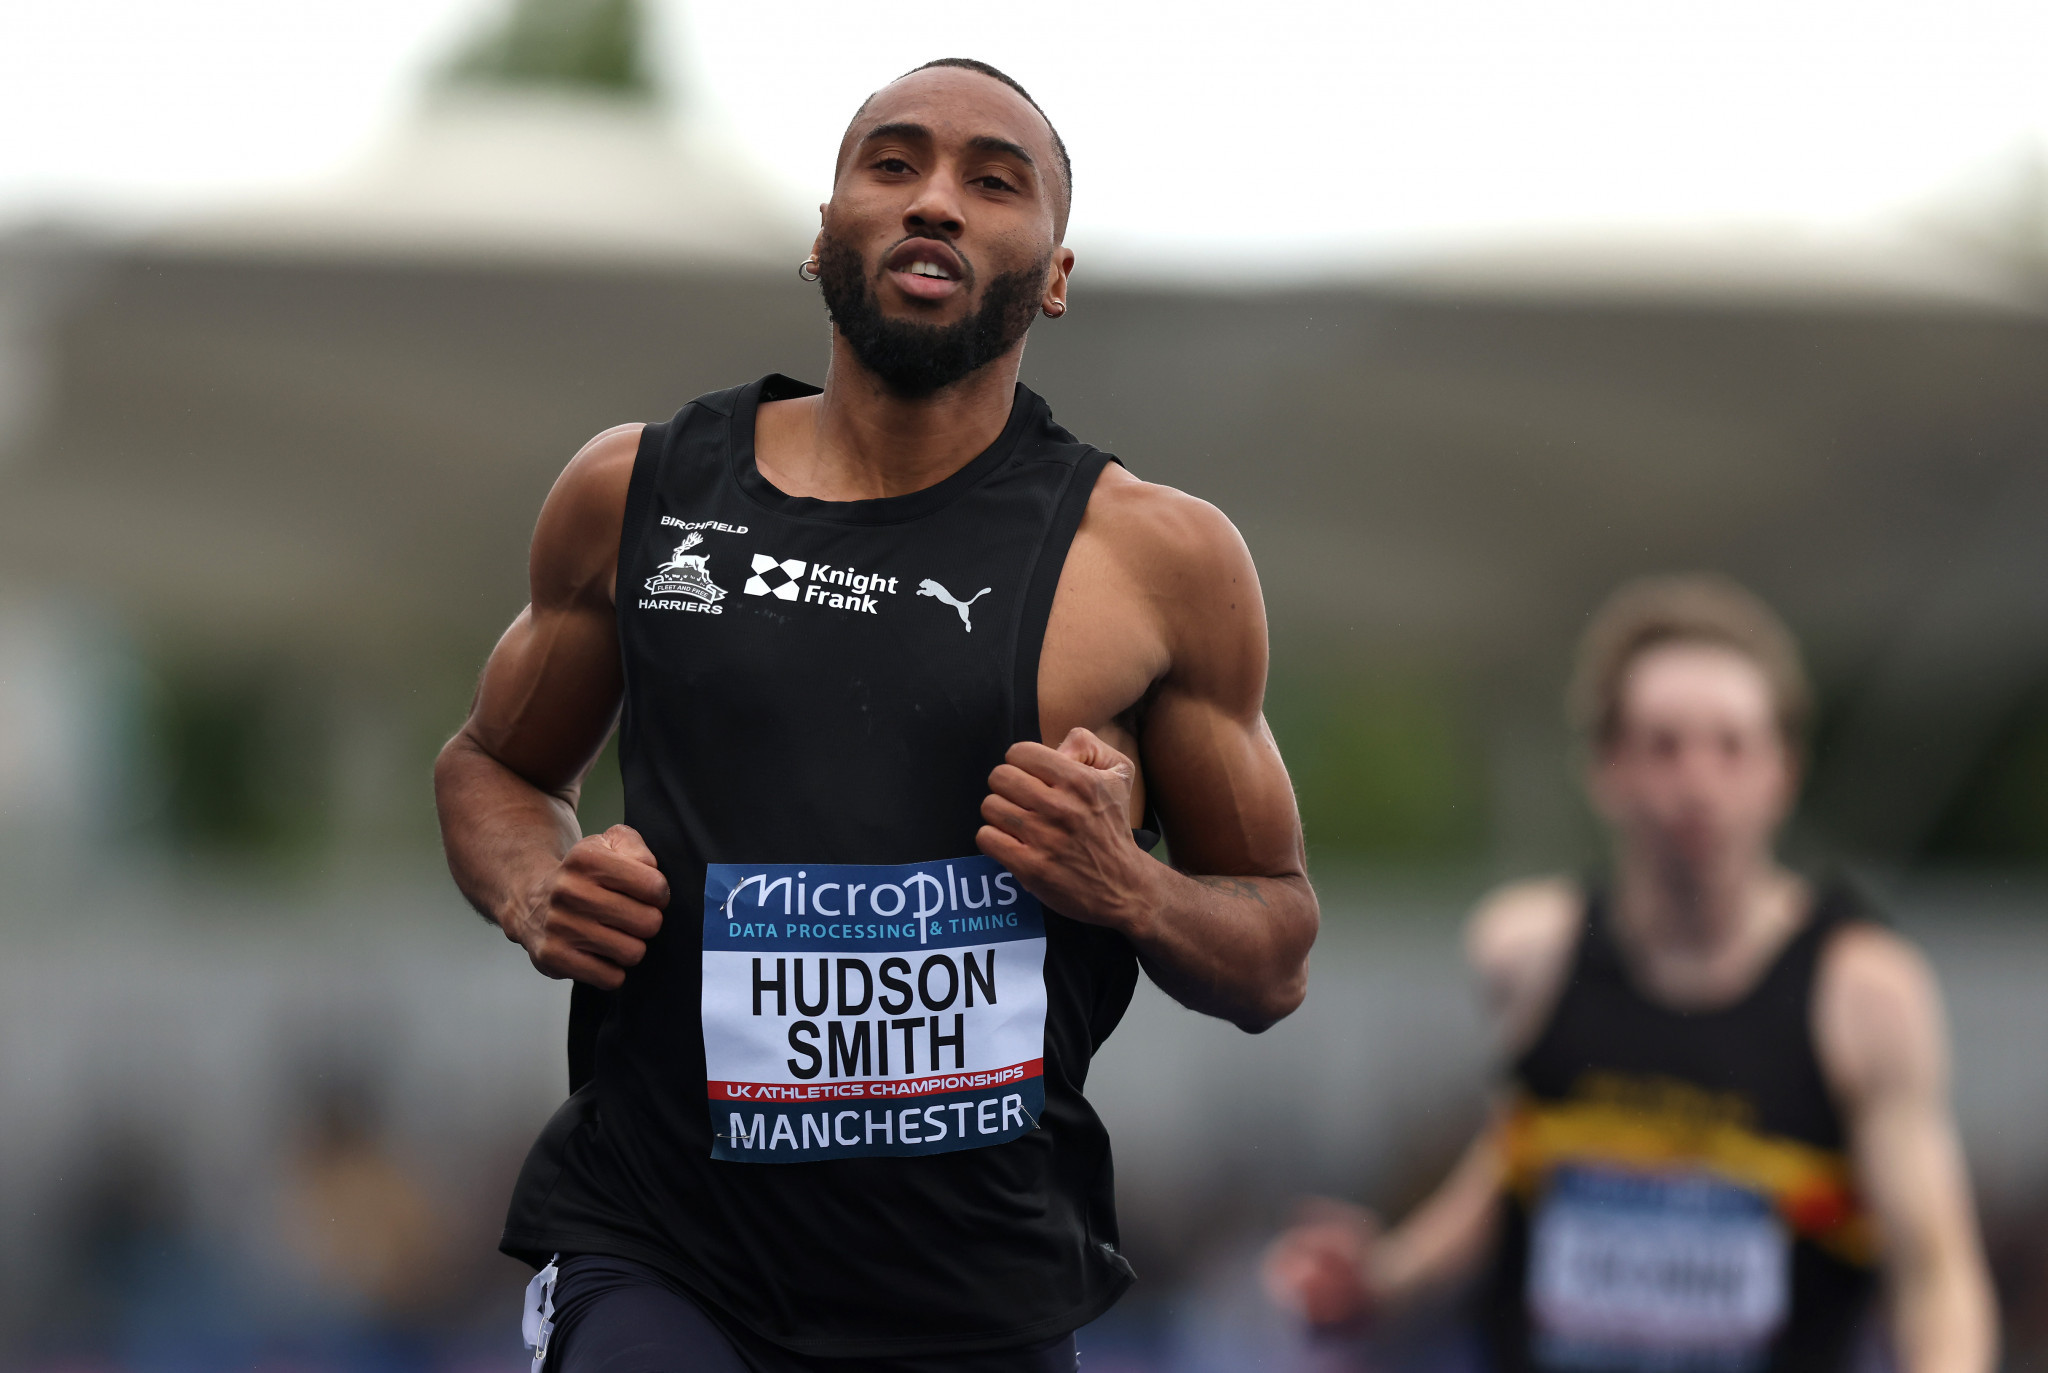 Matthew Hudson-Smith continued his stellar season by winning the men’s 200m. GETTY IMAGES